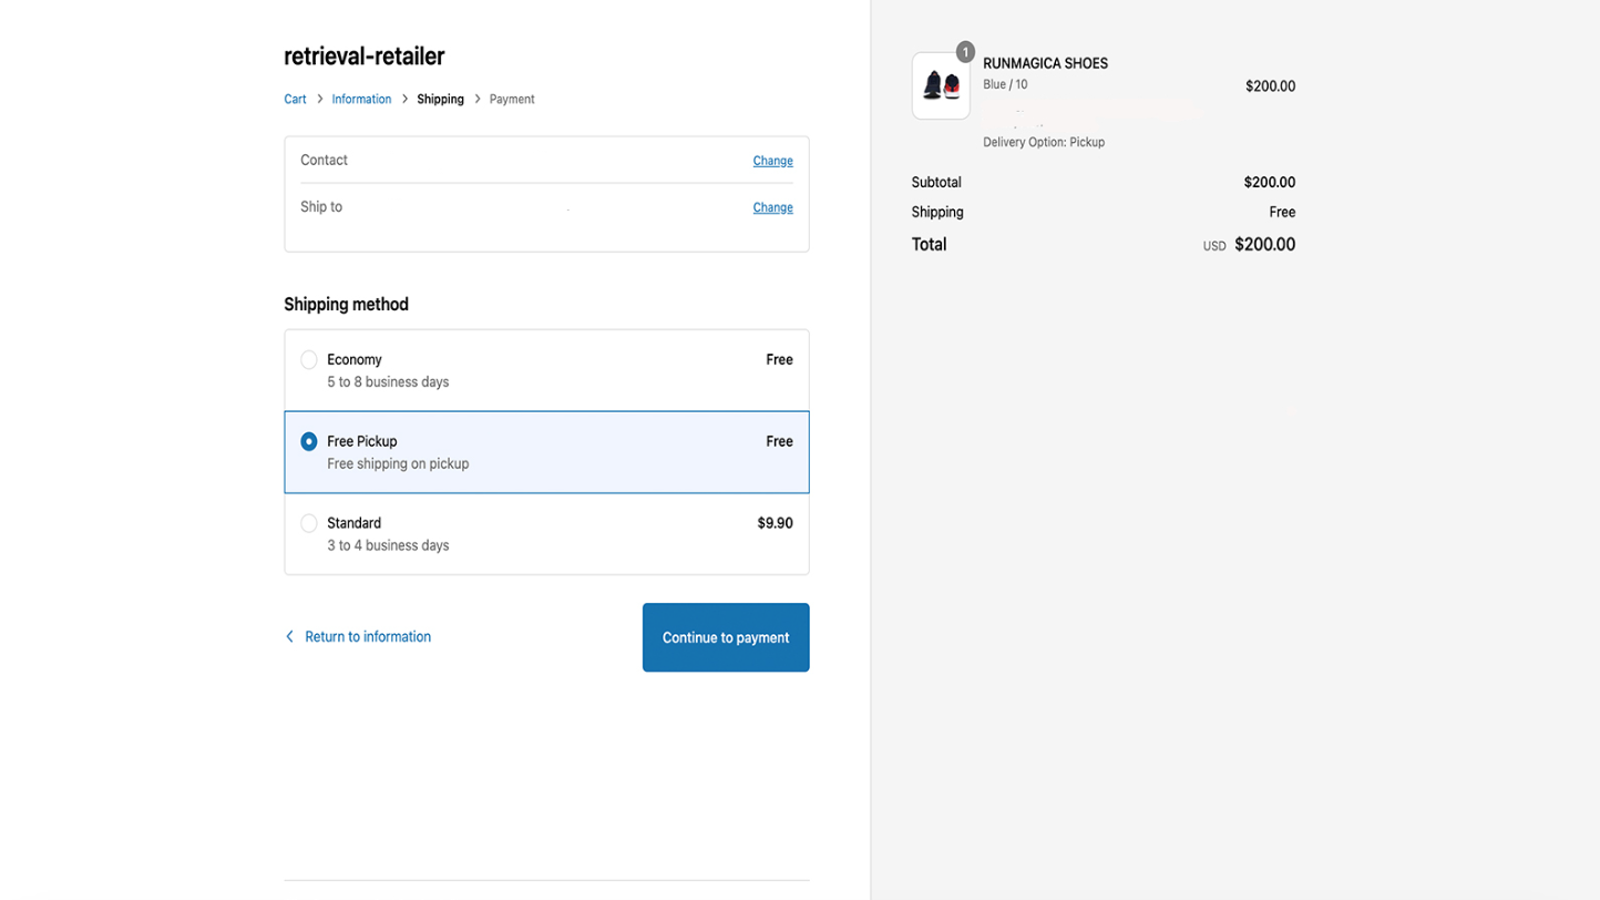 Retrieval allows consumers to complete orders on original site